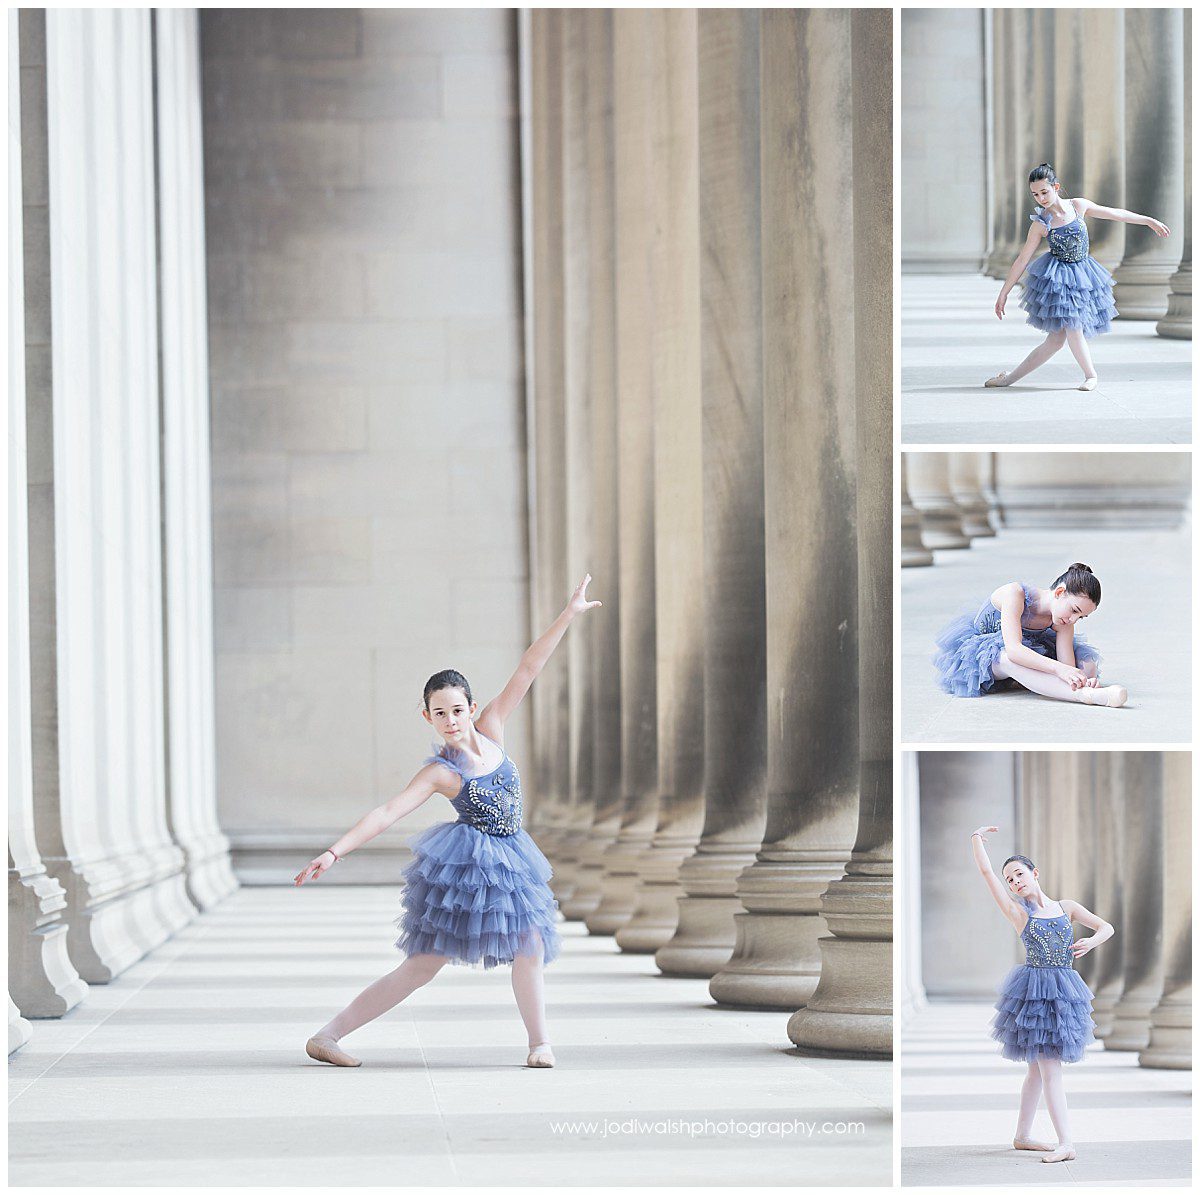 Images from creative dance portraits with Jodi Walsh Photography. this collage of images show a tween ballerina in blue dress dancing in stone hallway in Pittsburgh